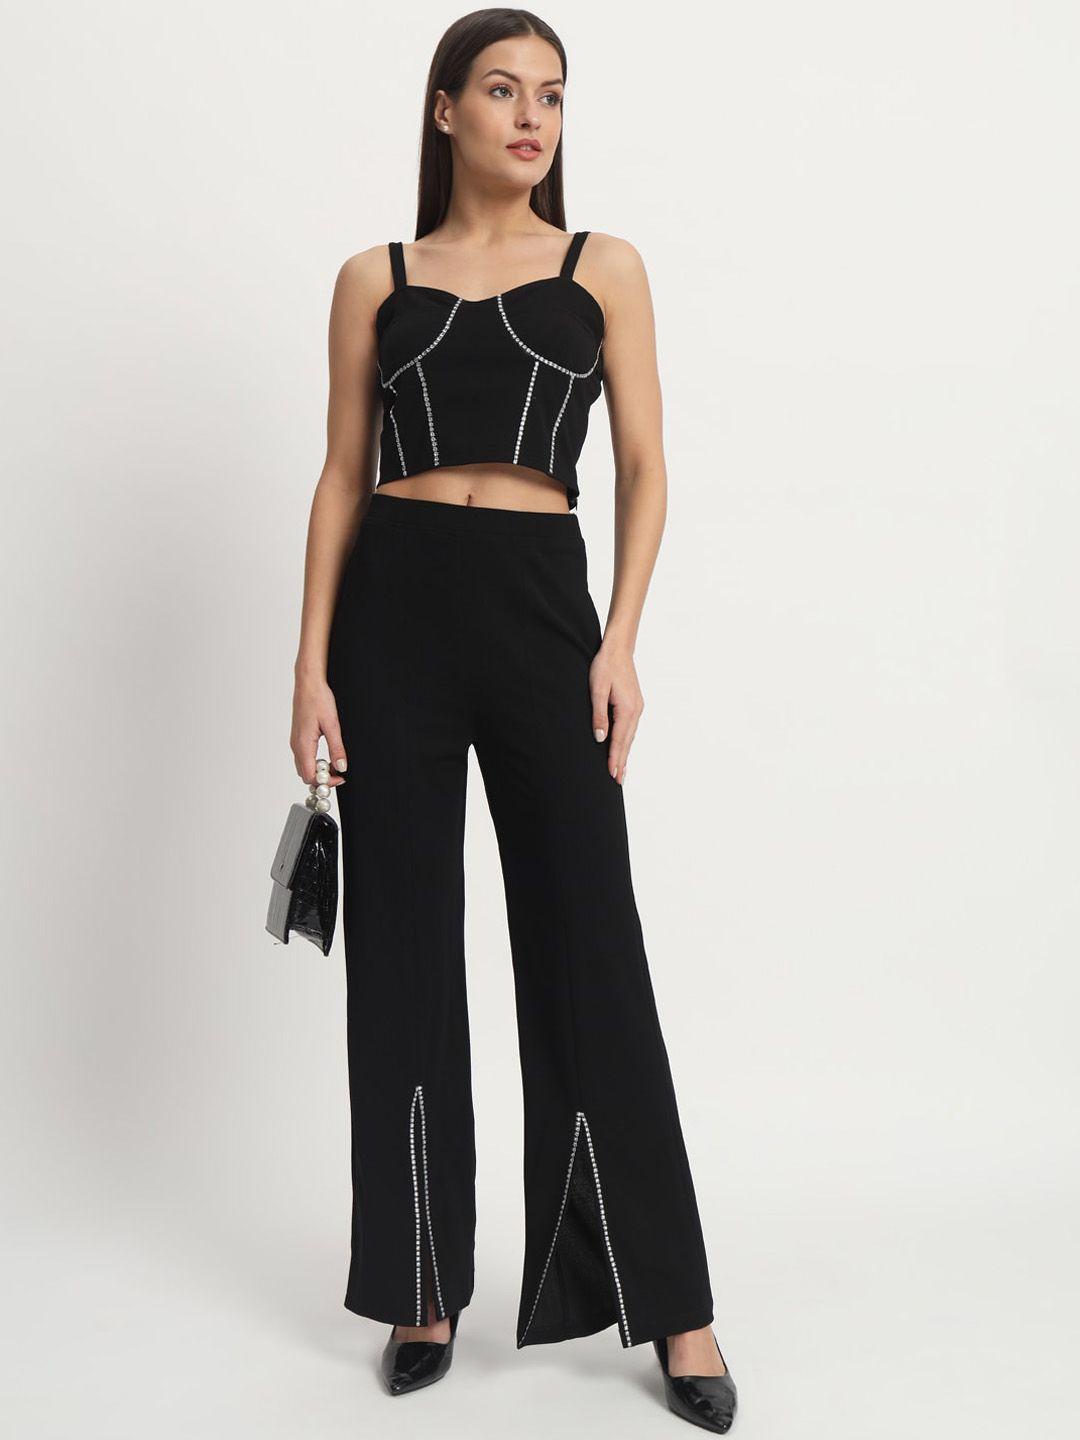 isam sweet heart neck crop top with mid-rise trouser co-ords